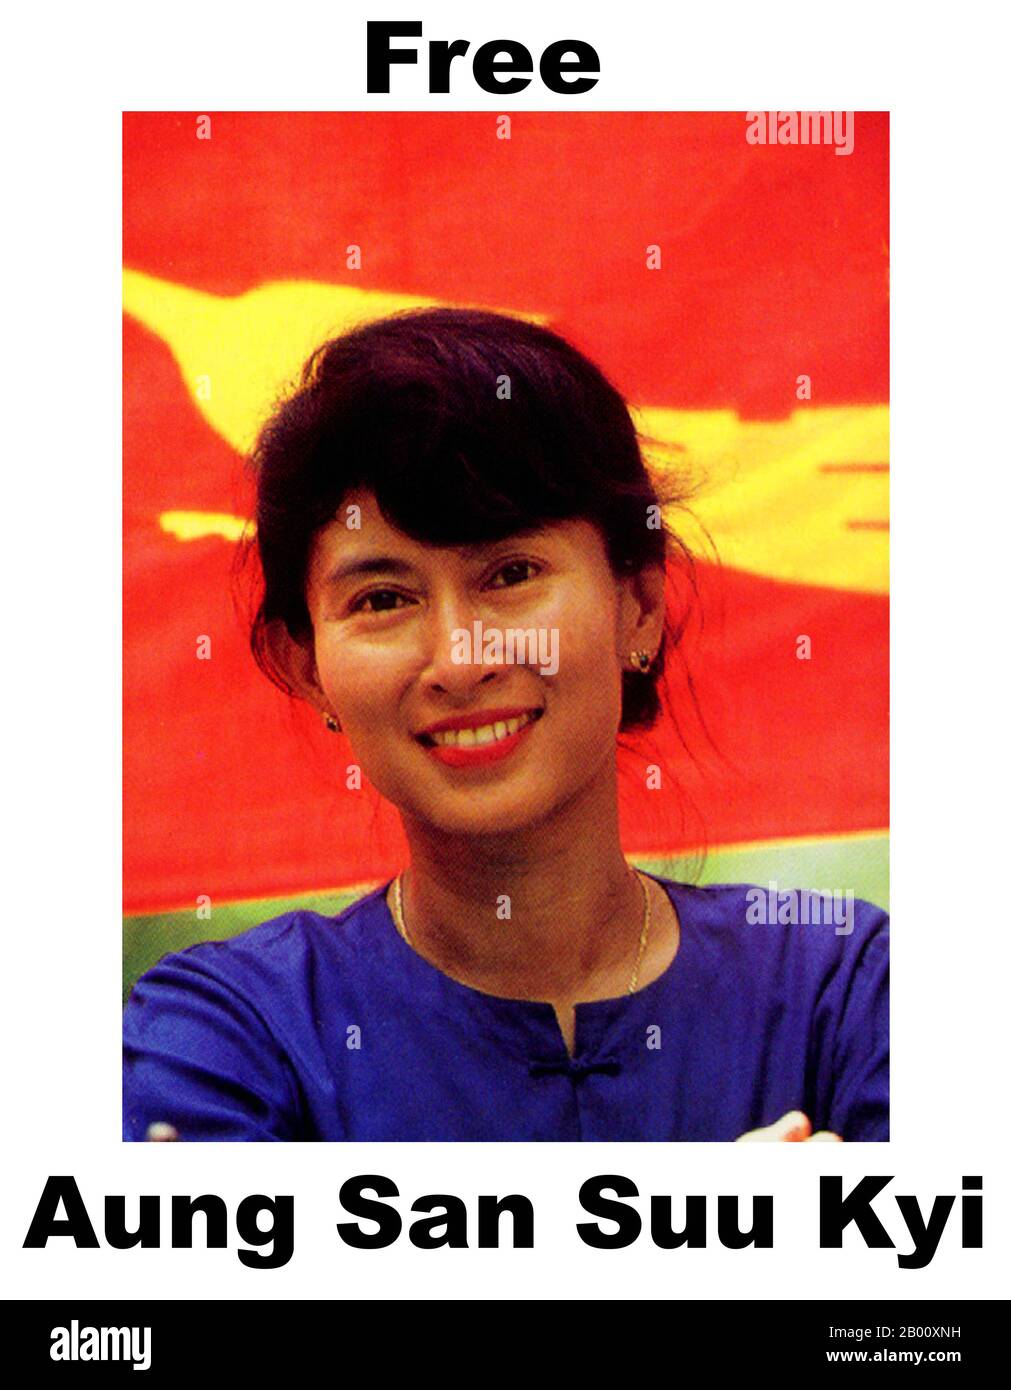 Burma/Myanmar: Daw Aung San Suu Kyi (1945- ), Burmese politician, 'democrat' and opposition leader.  Aung San Suu Kyi  (born June 19 1945) is a Burmese opposition politician and General Secretary of the National League for Democracy. In the 1990 general election, Suu Kyi was elected Prime Minister as leader of the winning National League for Democracy party, which won 59% of the vote and 394 of 492 seats. She had, however, already been detained under house arrest before the elections. She remained under house arrest in Myanmar for almost 15 years until 2010. Stock Photo